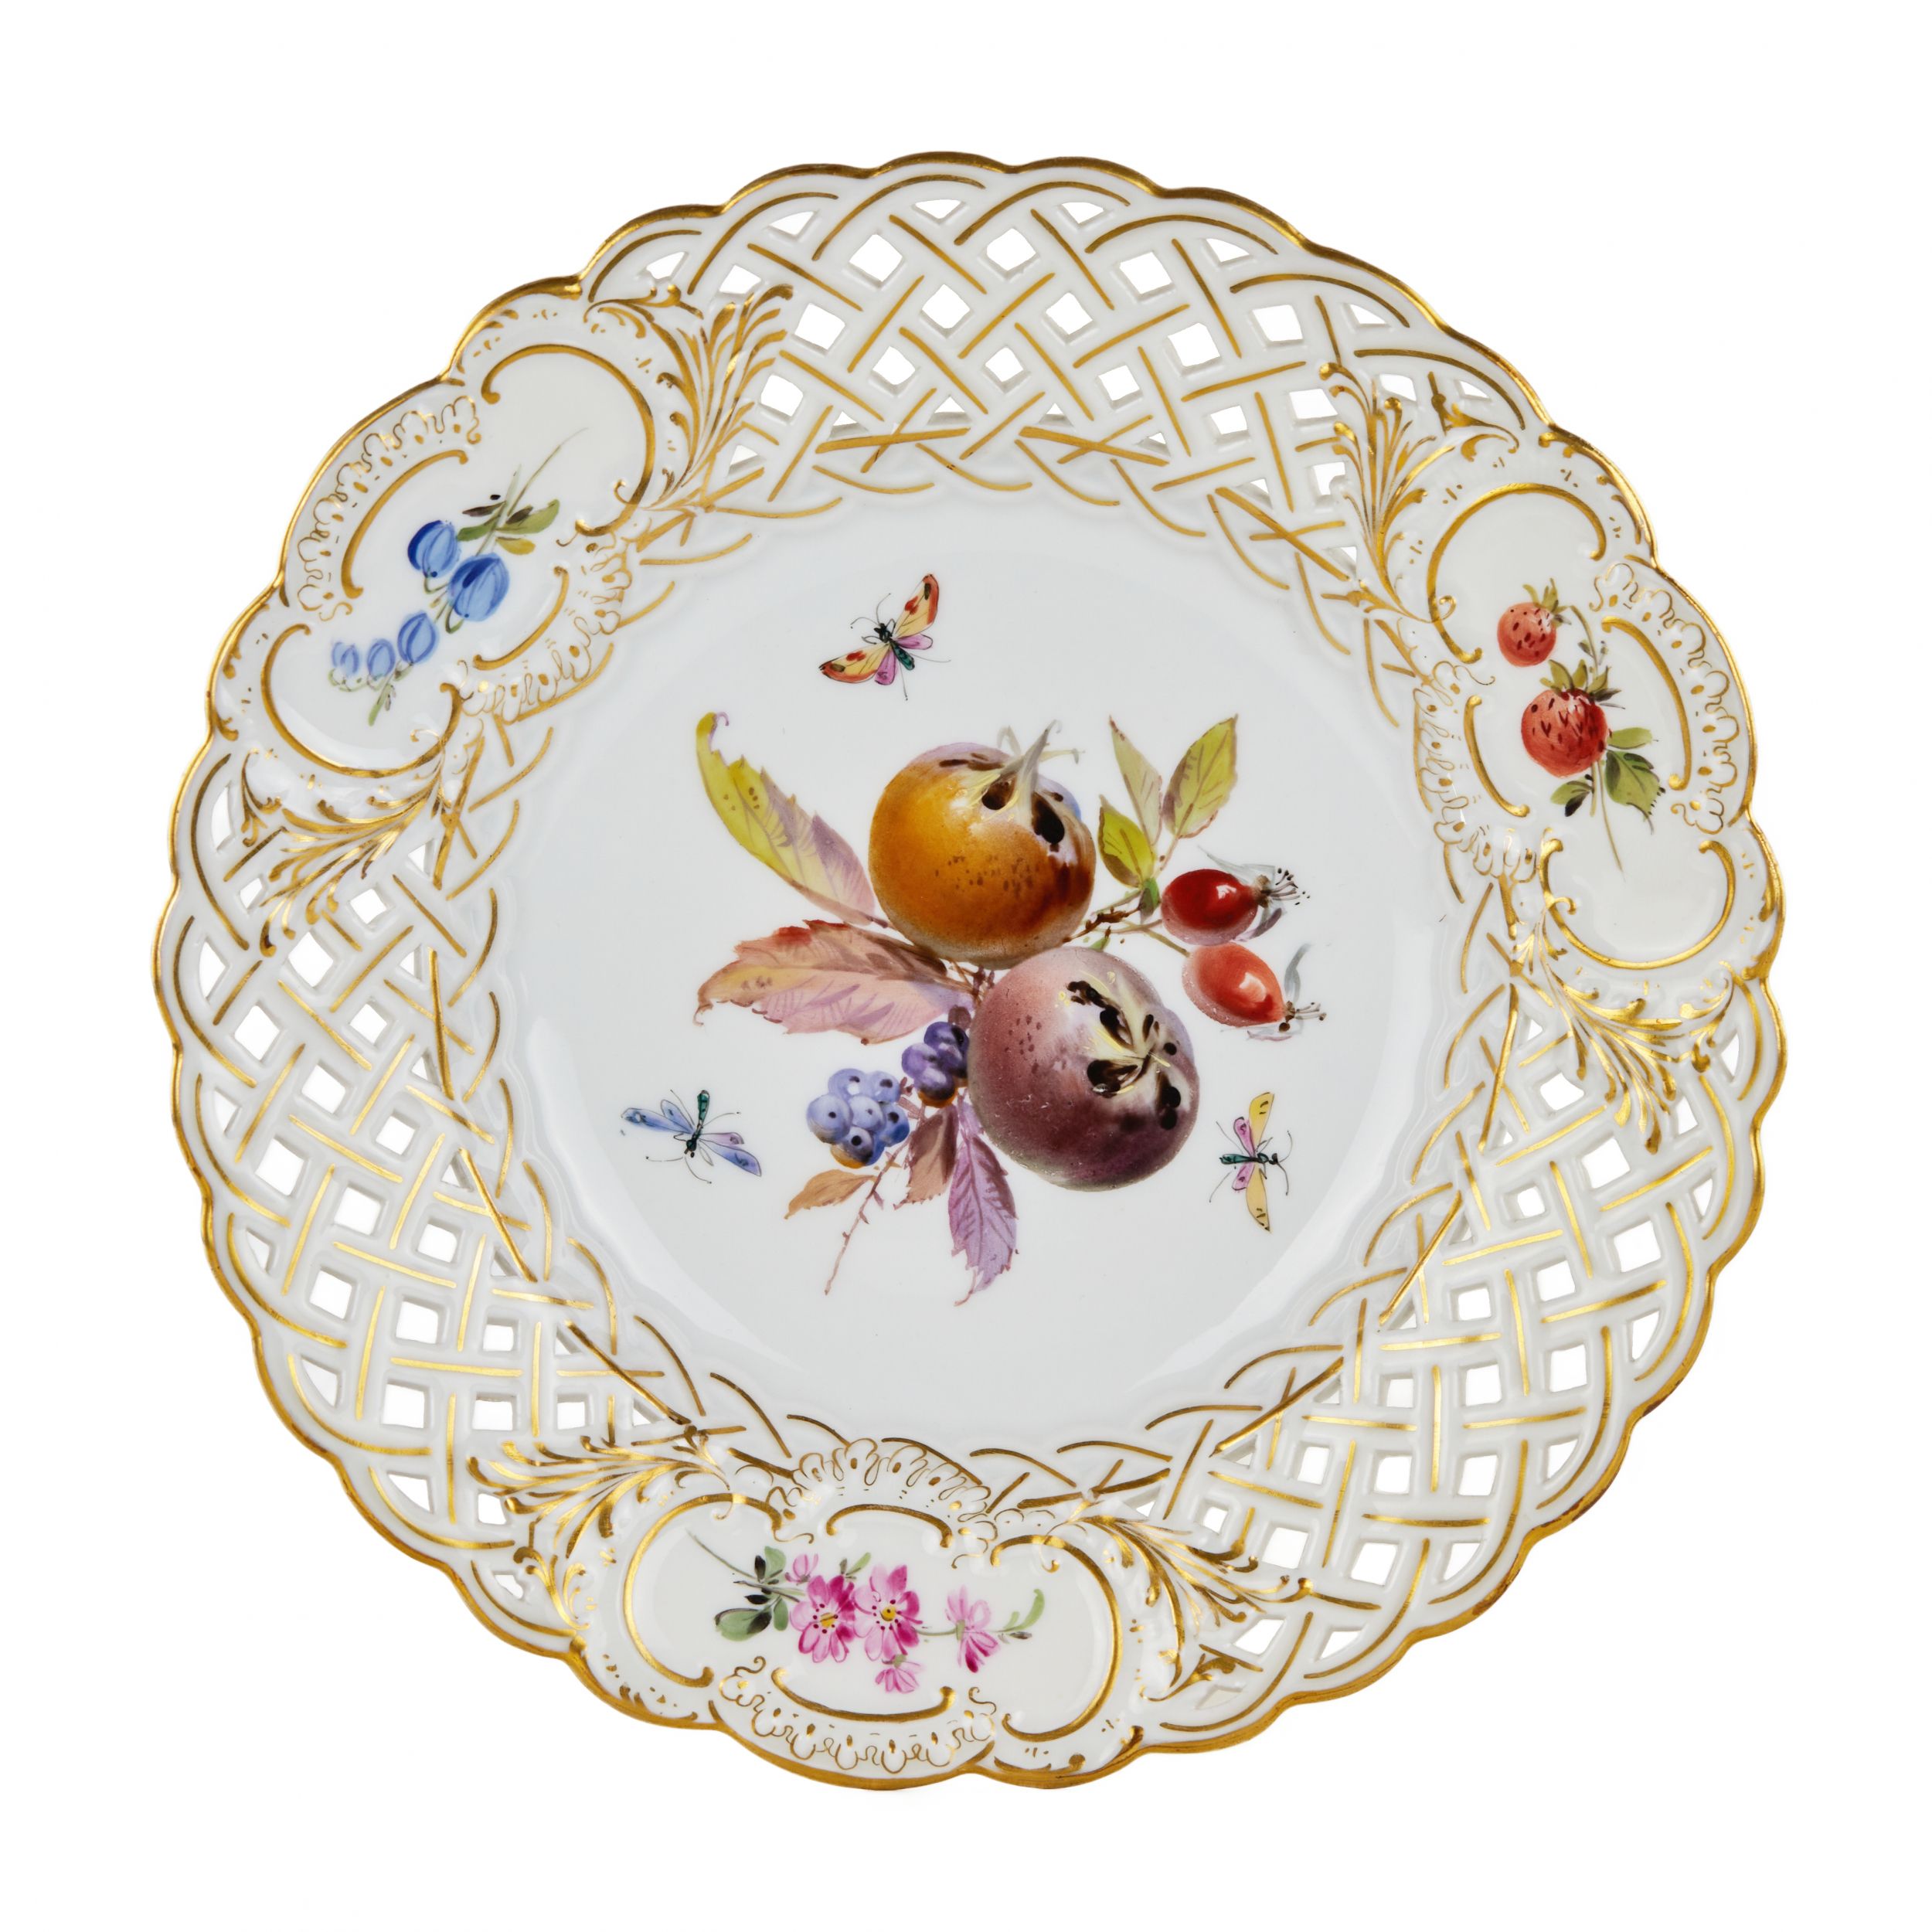 Dessert-porcelain-plate-decorated-with-images-of-berries-Meissen-After-1934-